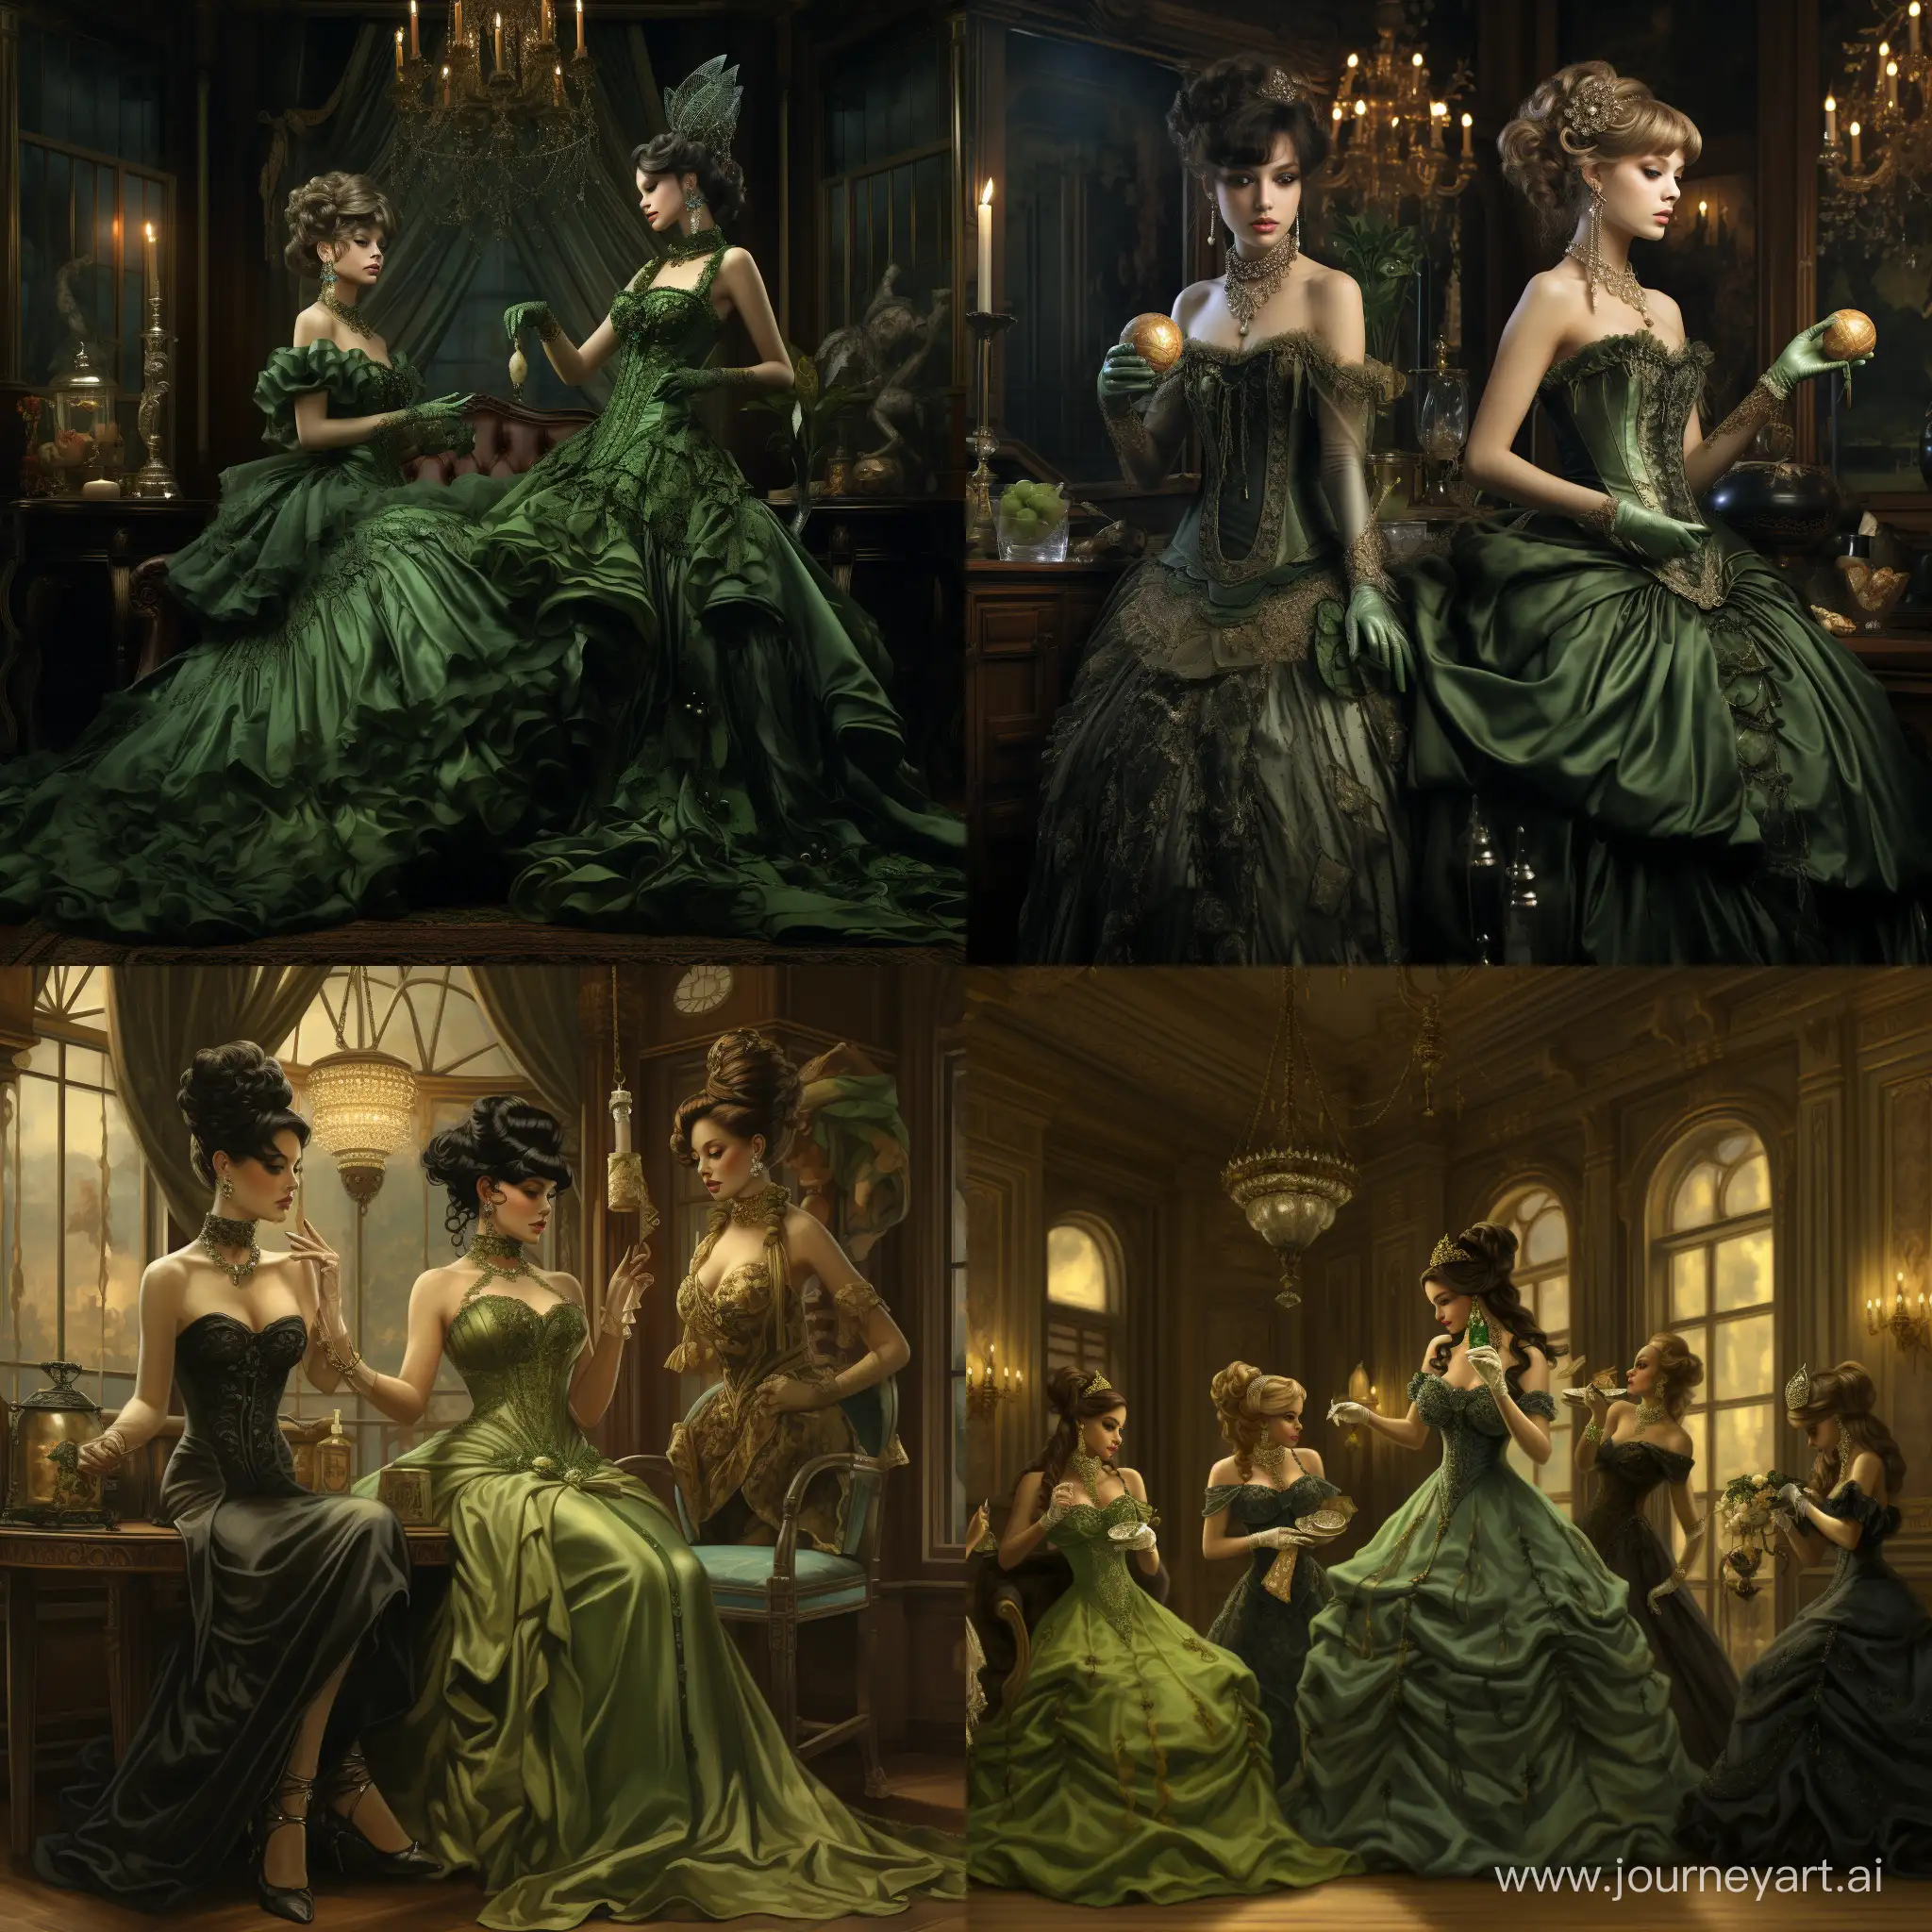 Victorian-Poisonous-Elegance-Opulent-Ballroom-Fashion-with-Arseniclaced-Dresses